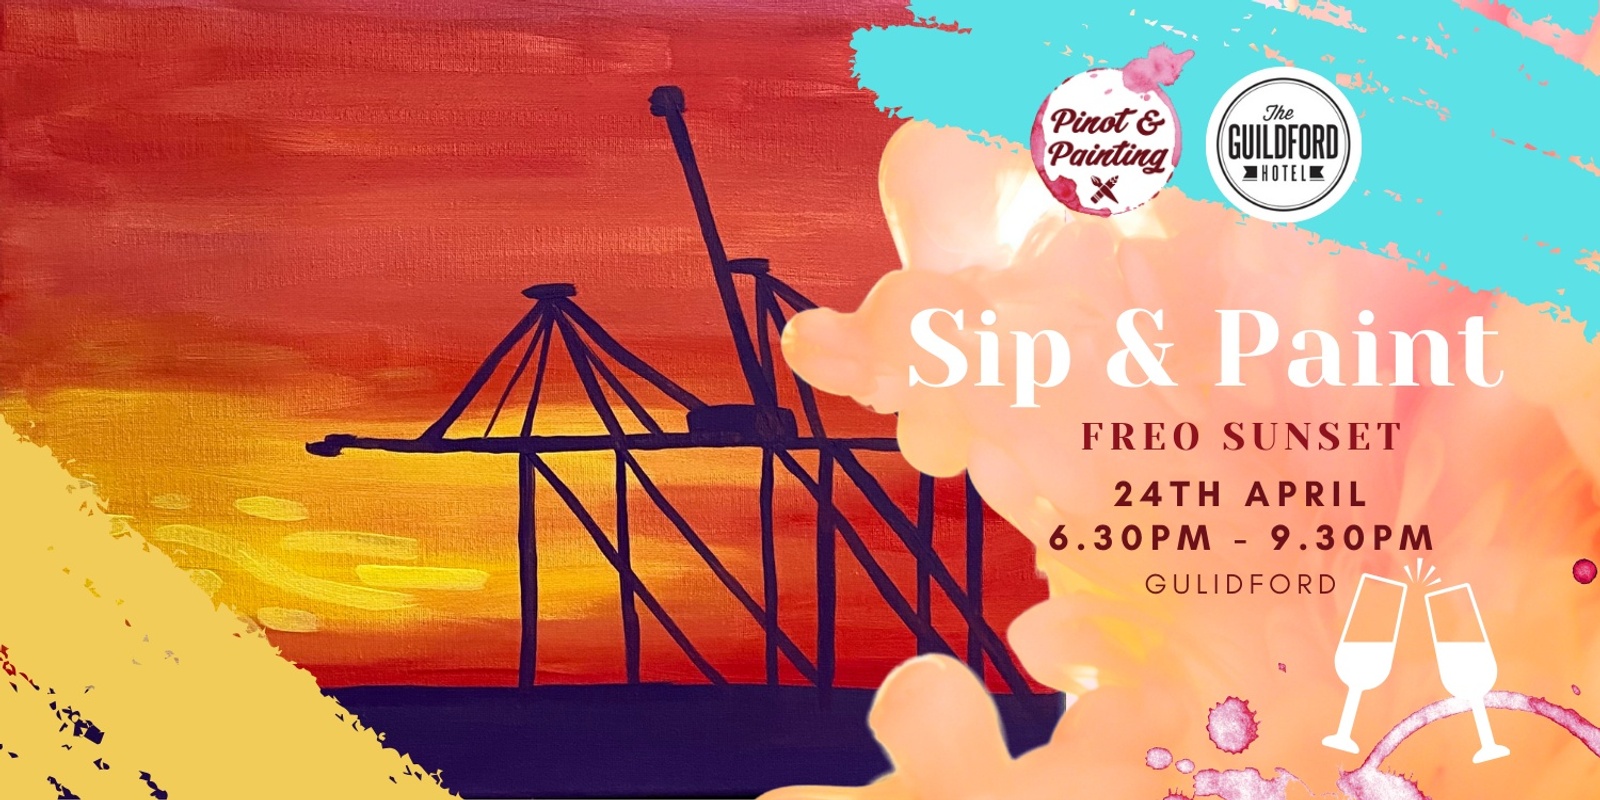 Banner image for Freo Sunset - Sip & Paint @ The Guildford Hotel